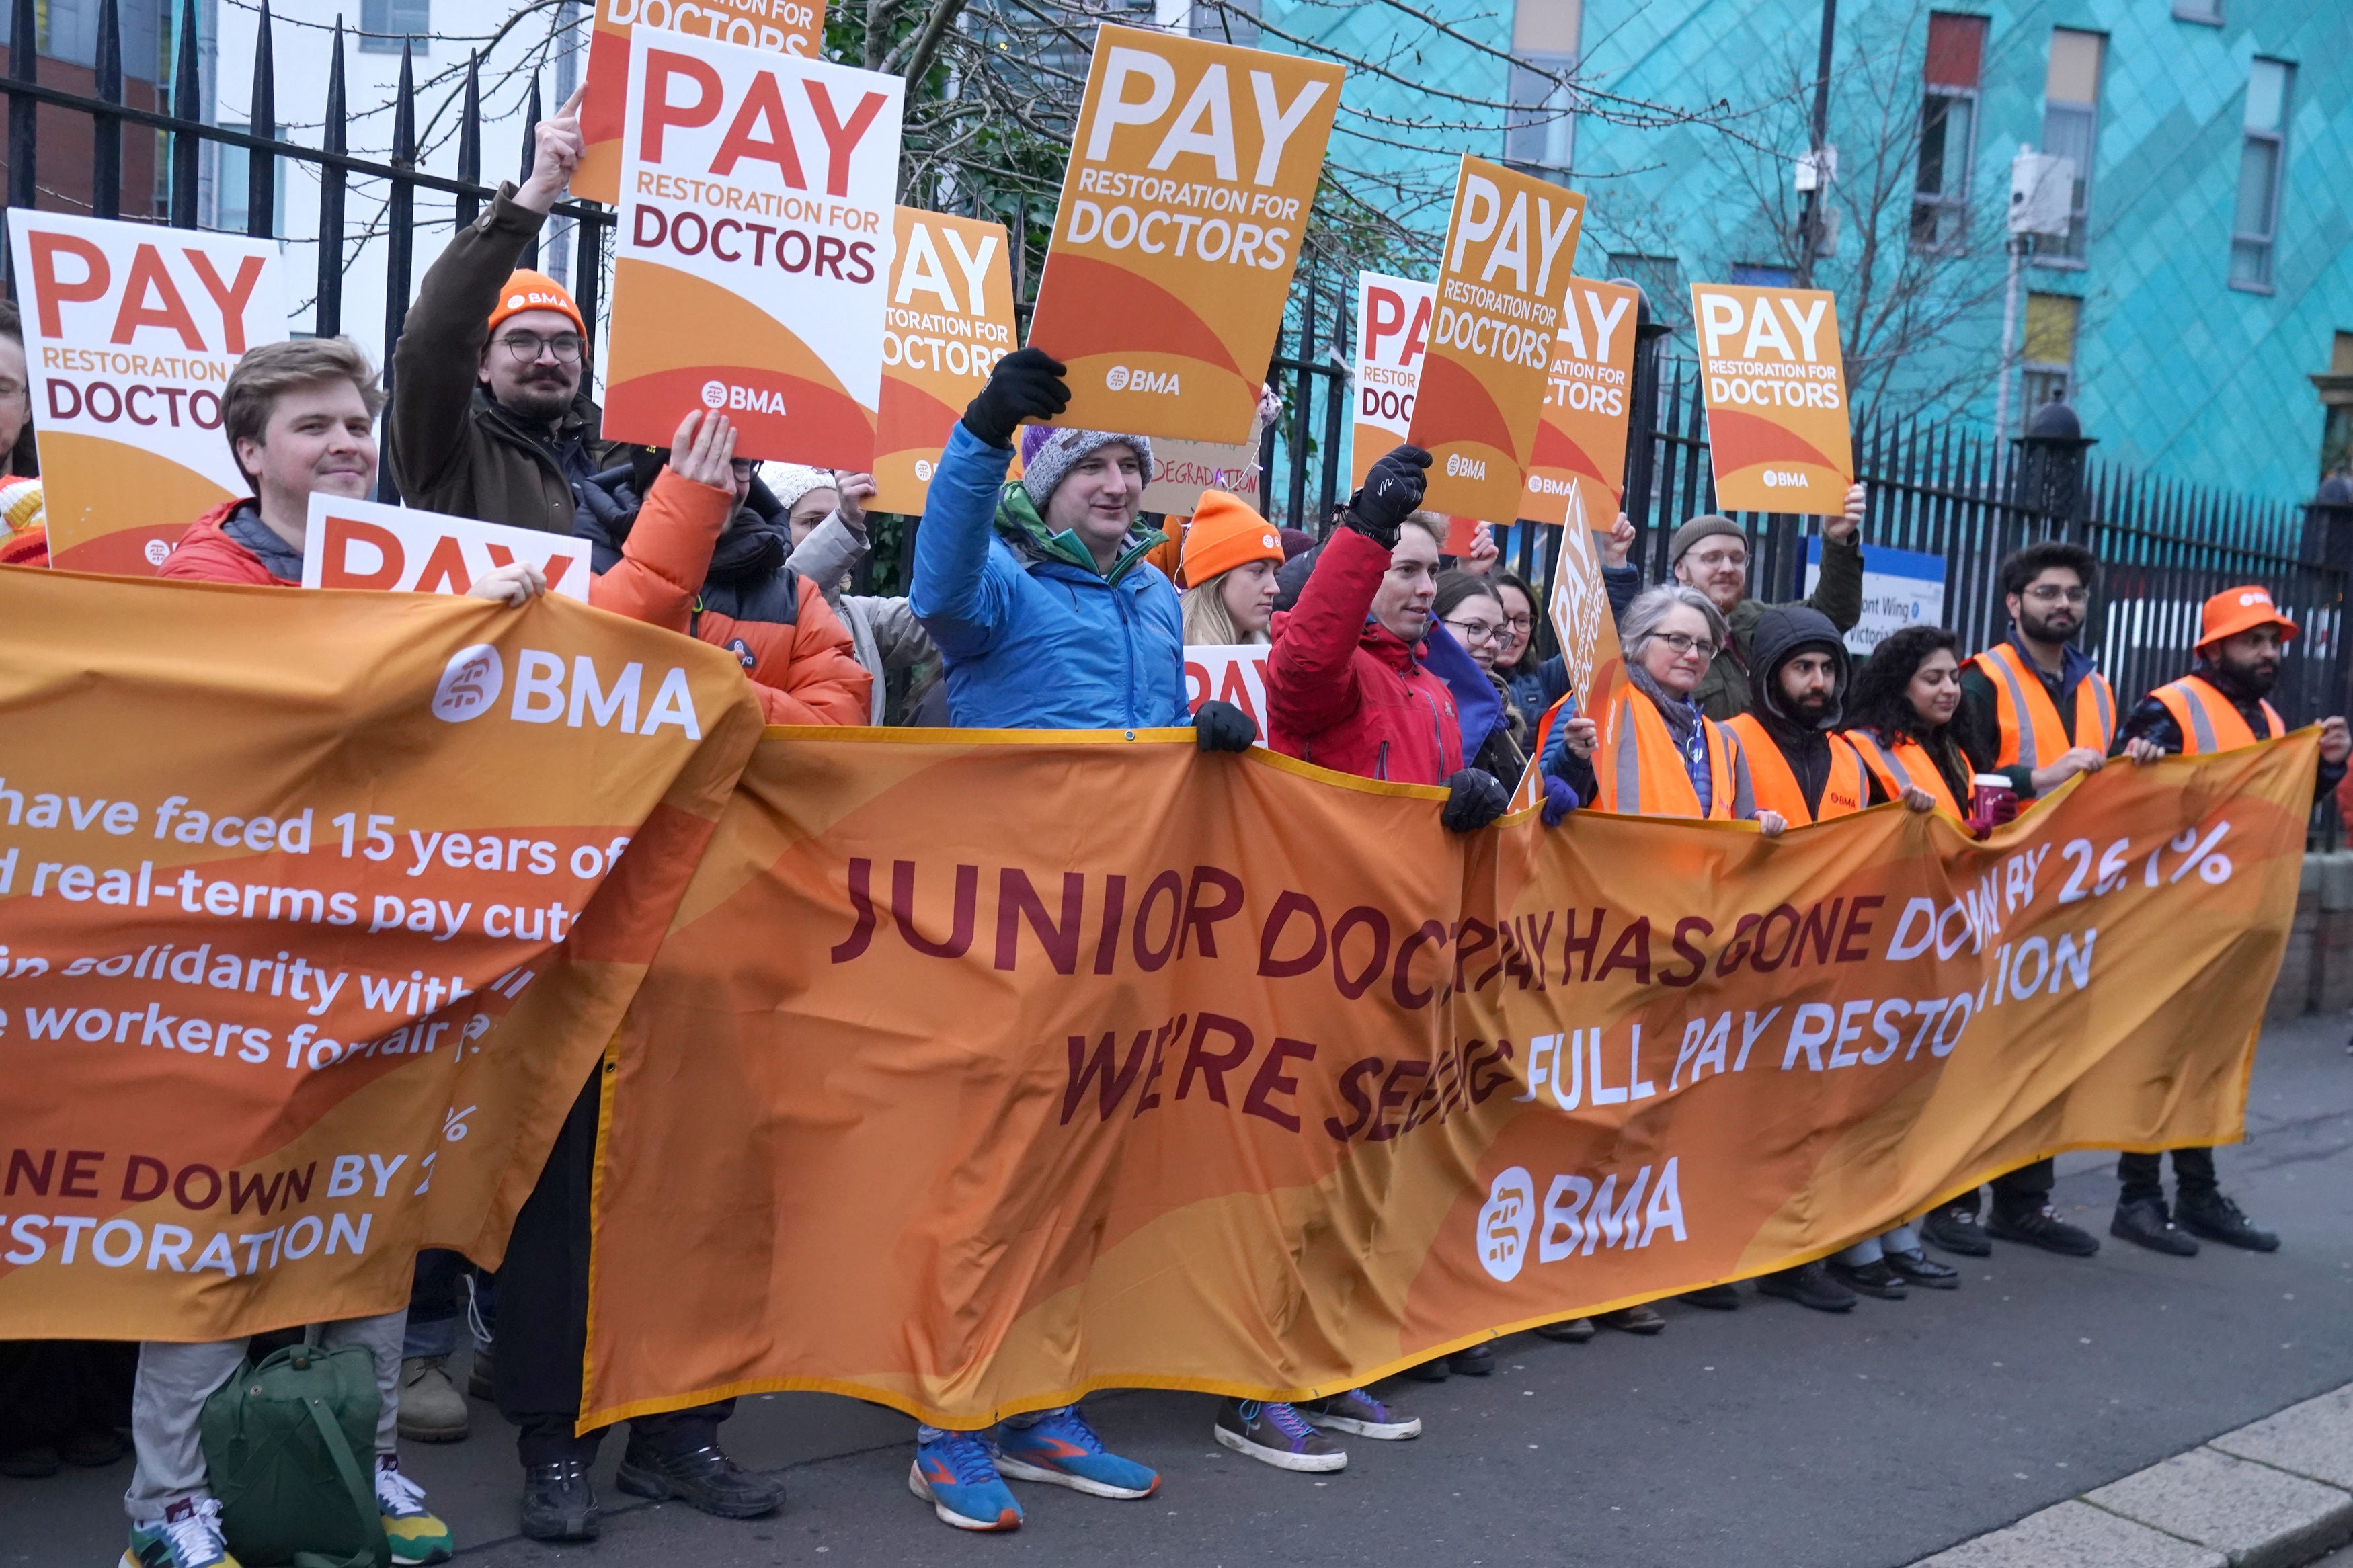 Junior doctors and members of the British Medical Association (BMA) on the picket line outside Royal Victoria Infirmary